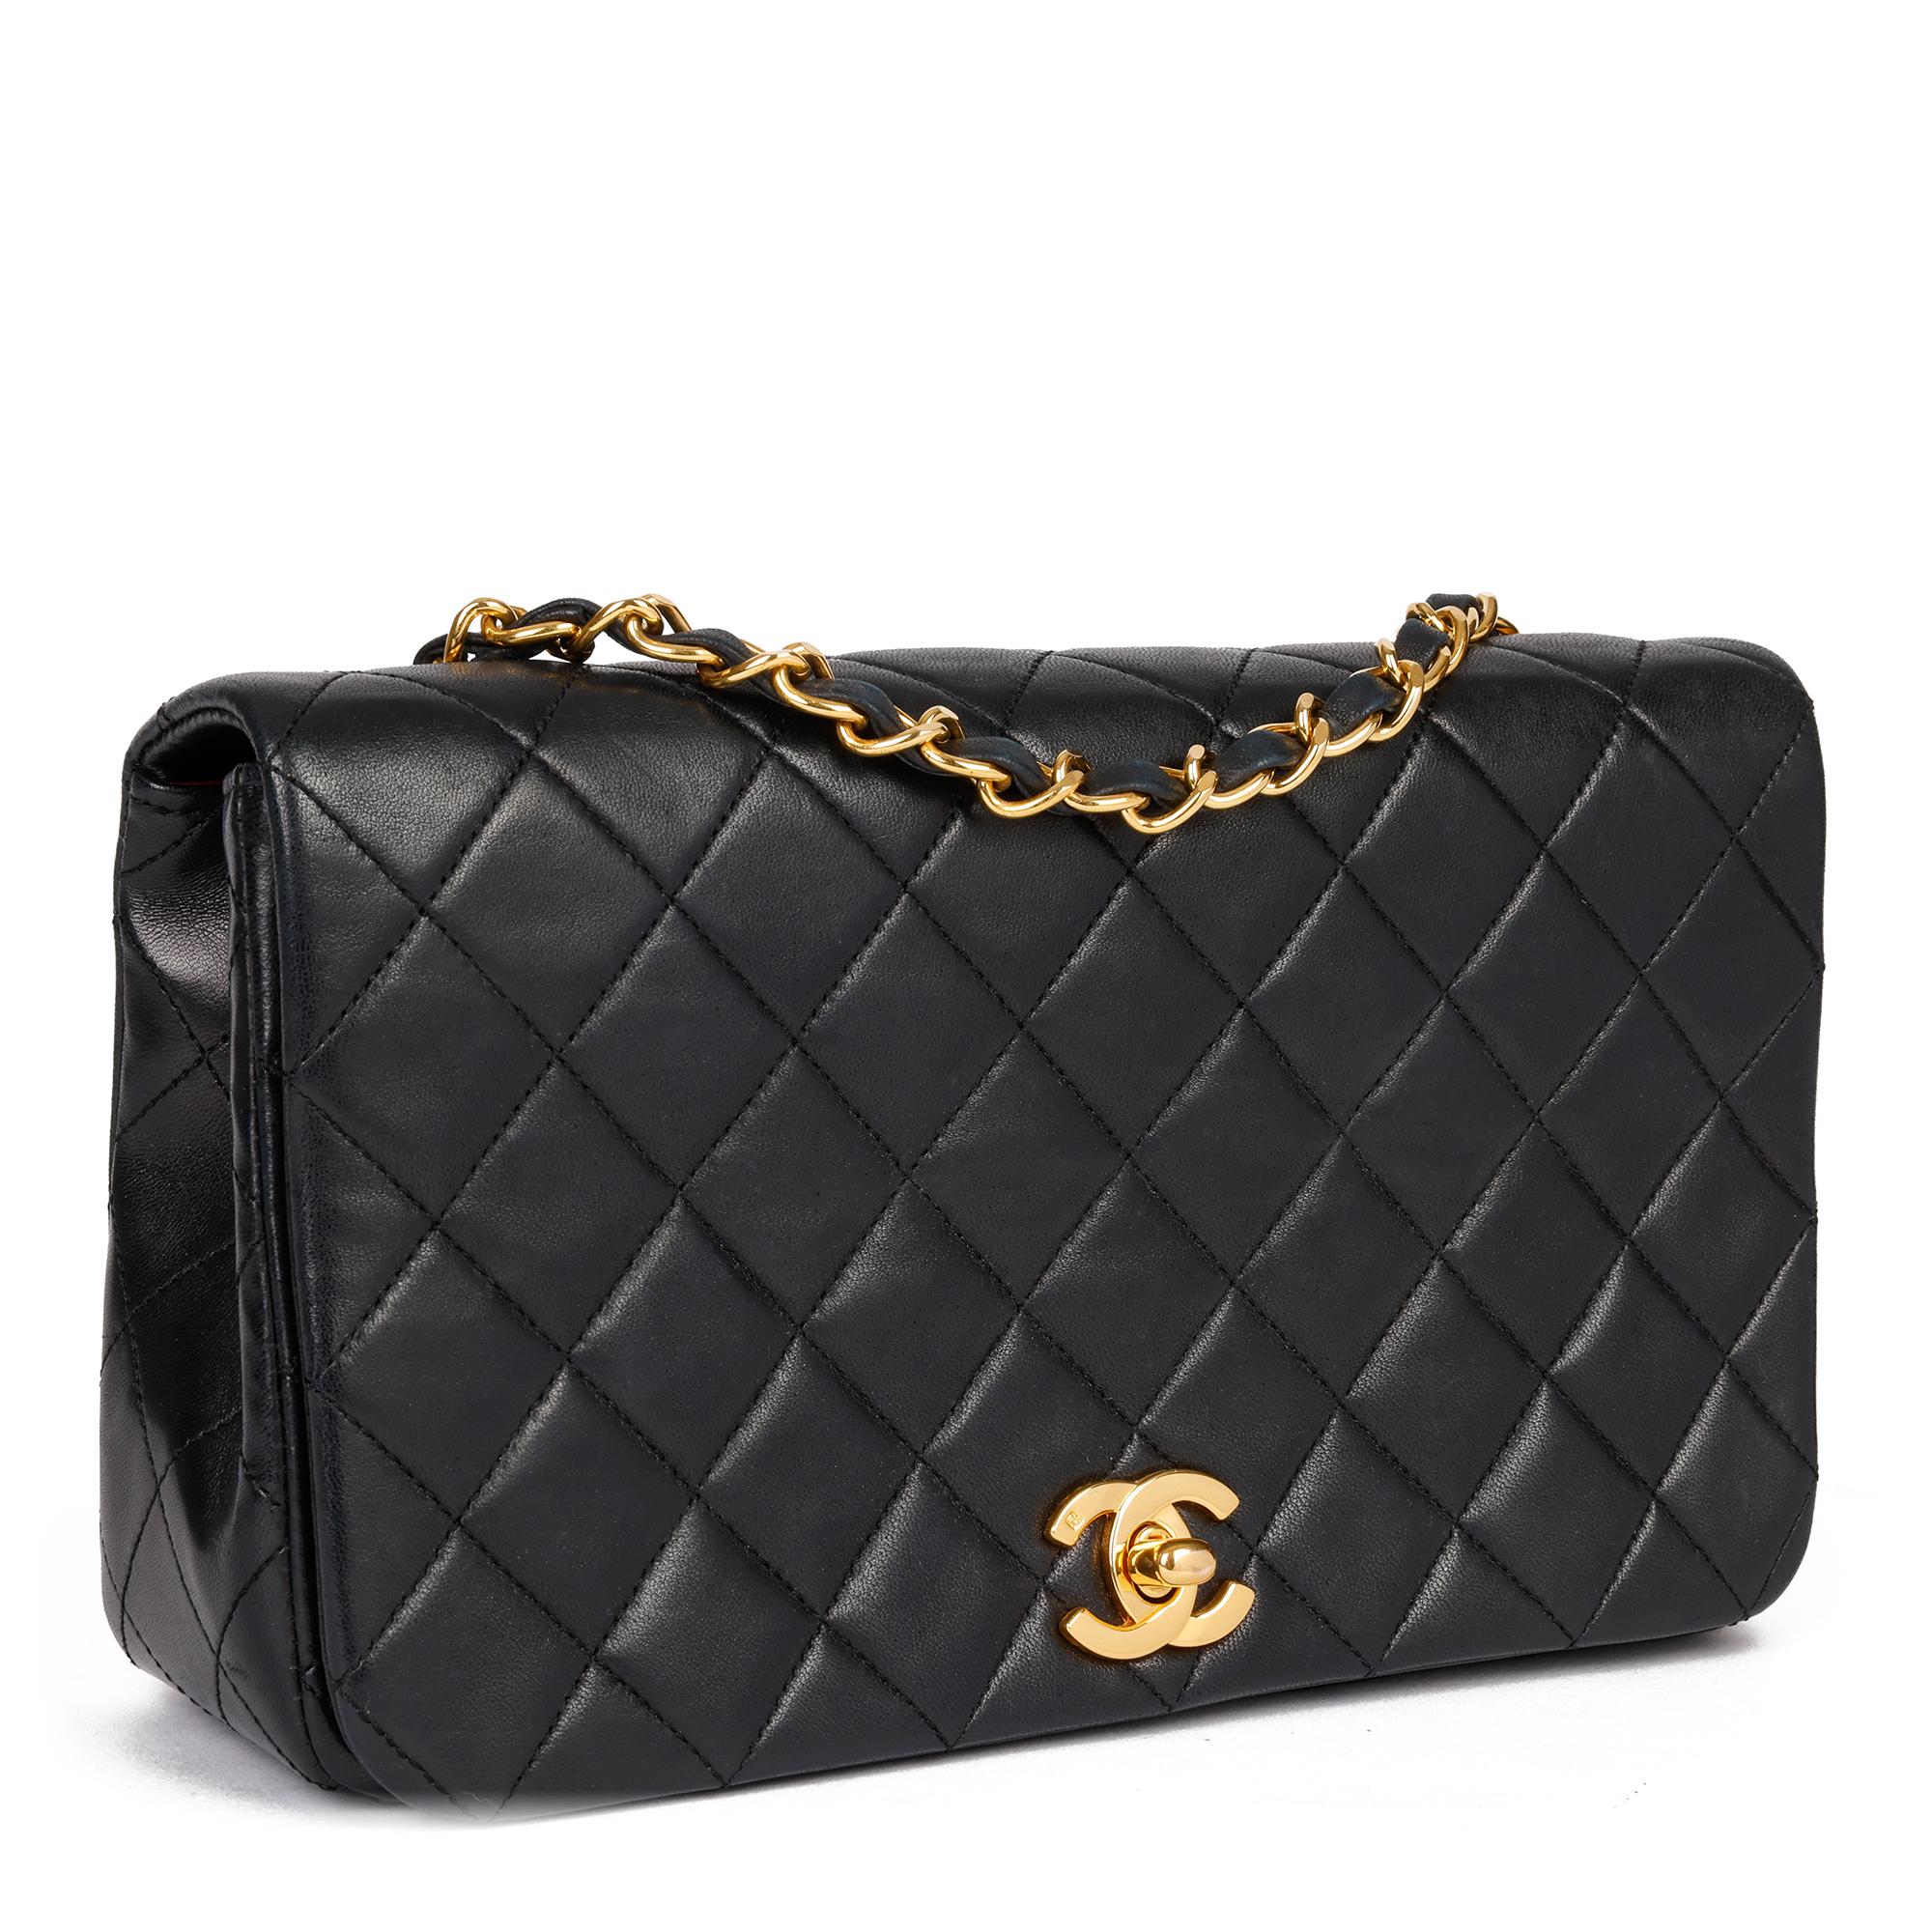 CHANEL
Black Quilted Lambskin Leather Vintage Classic Single Full Flap Bag 

Xupes Reference: HB3901
Serial Number: 1587113
Age (Circa): 1991
Accompanied By: Chanel Dust Bag, Box, Authenticity Card
Authenticity Details: Authenticity Card, Serial